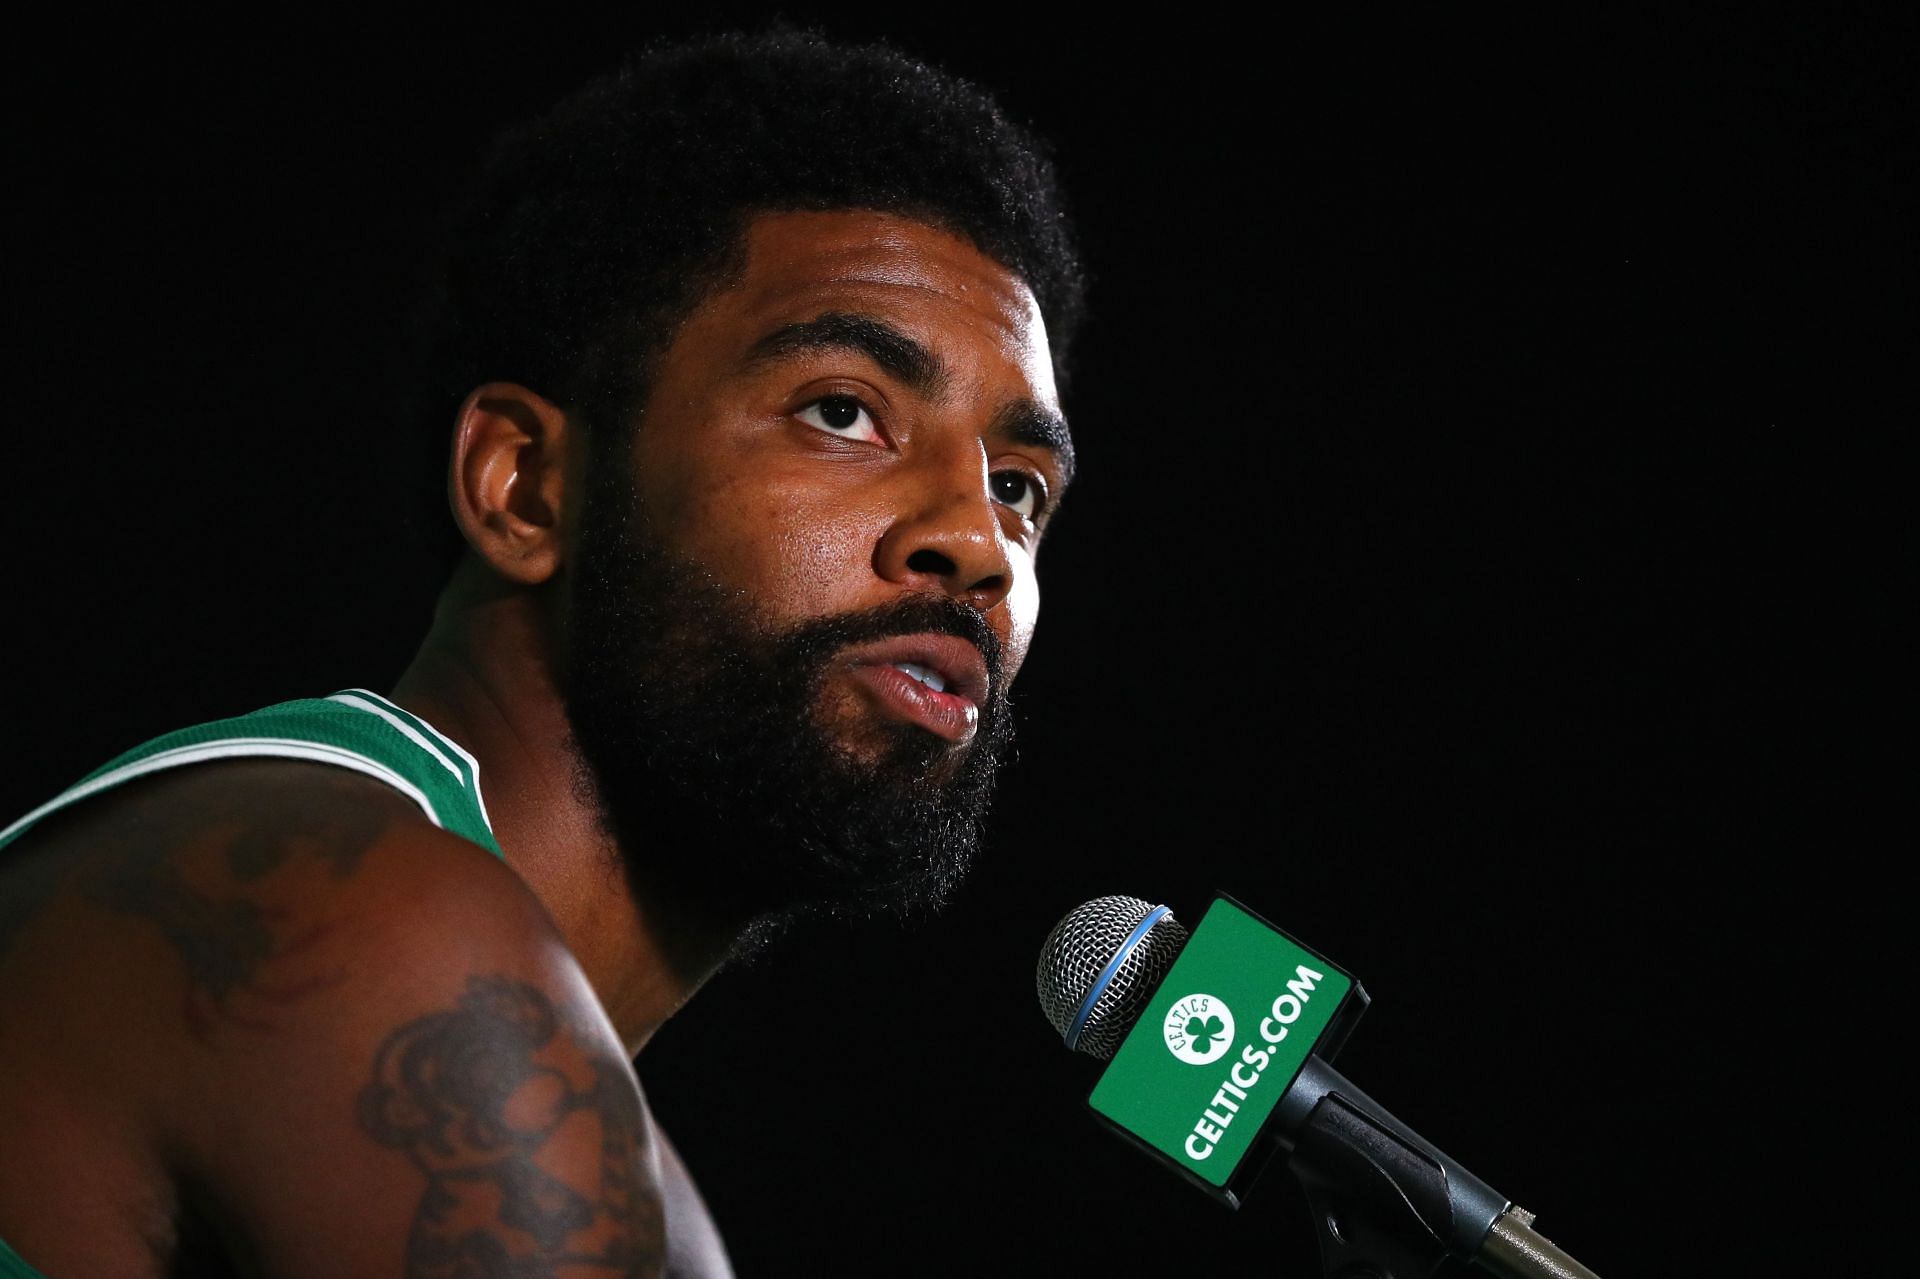 Kyrie Irving has always had a vehement dislike for the general media